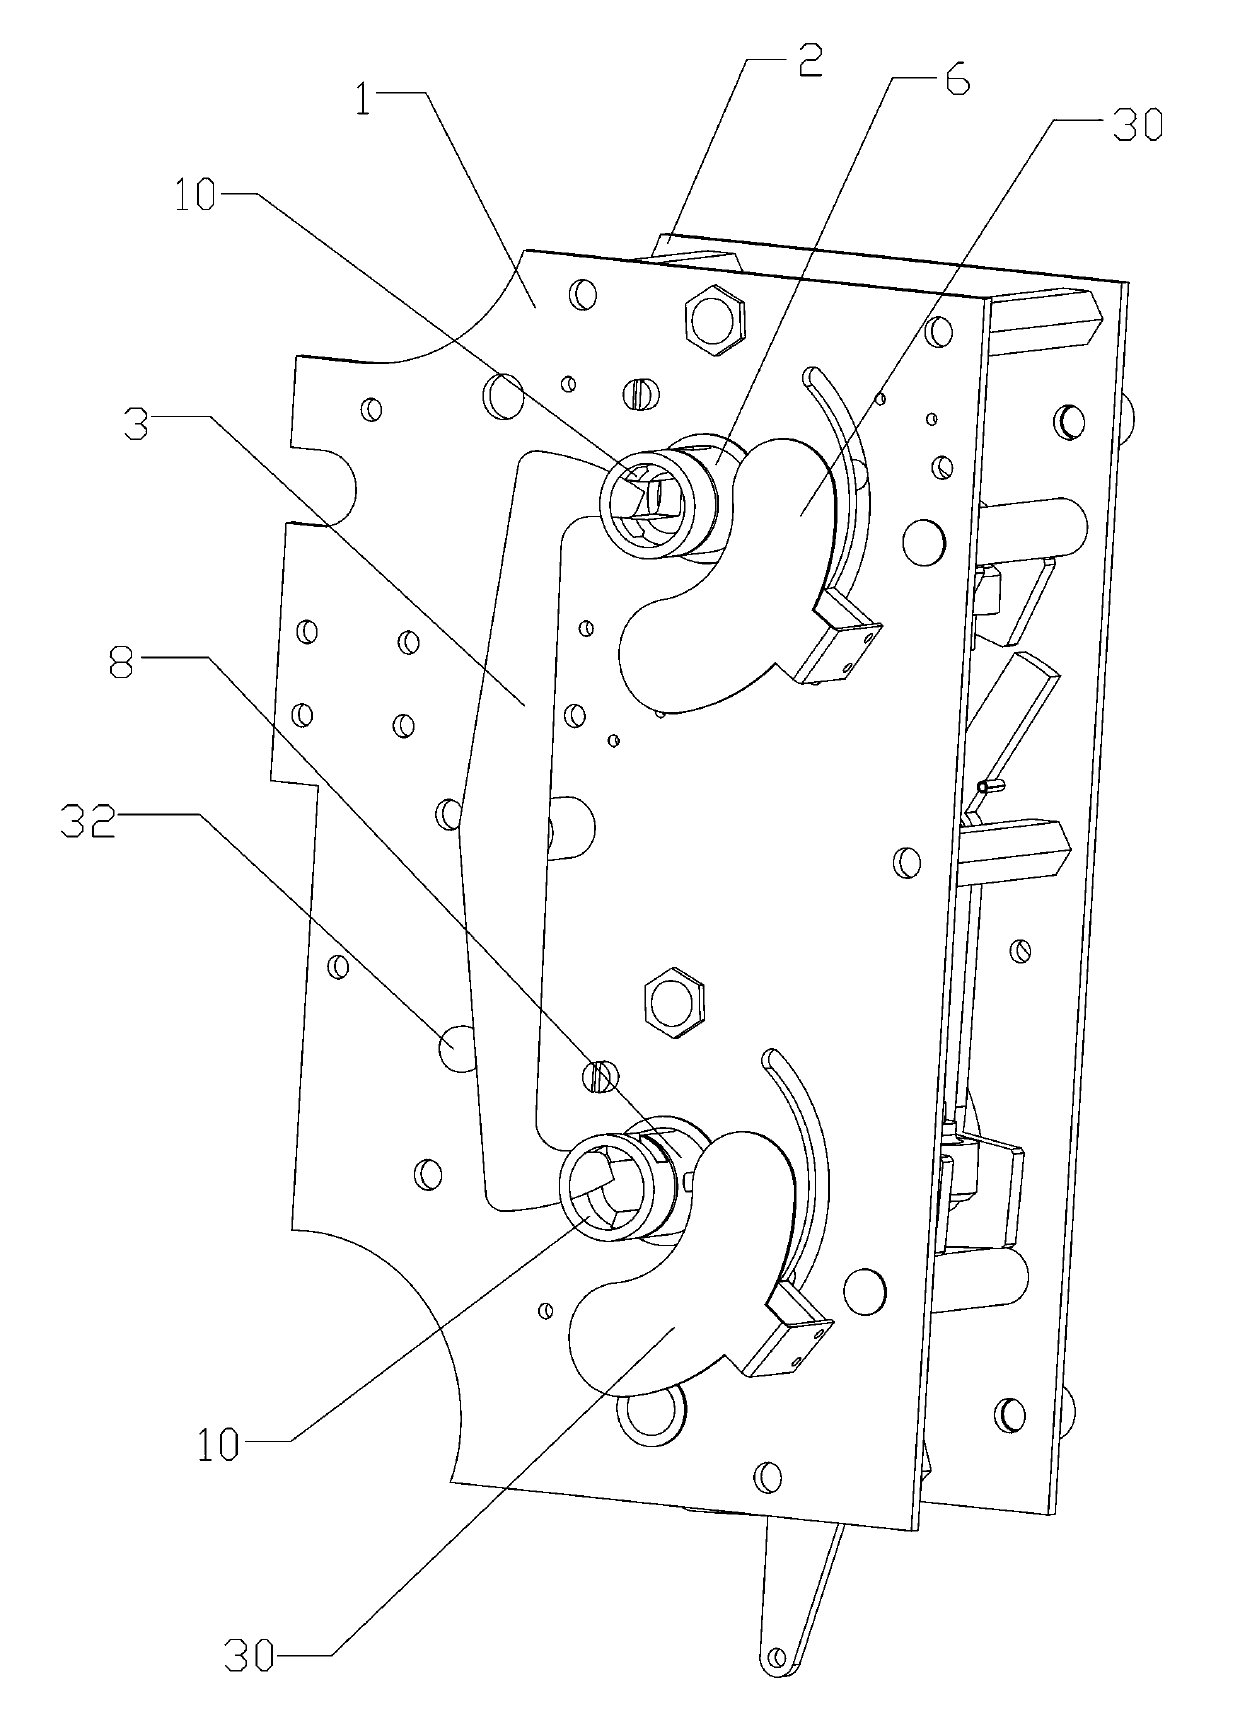 Operating mechanism of simple metal enclosed switch equipment